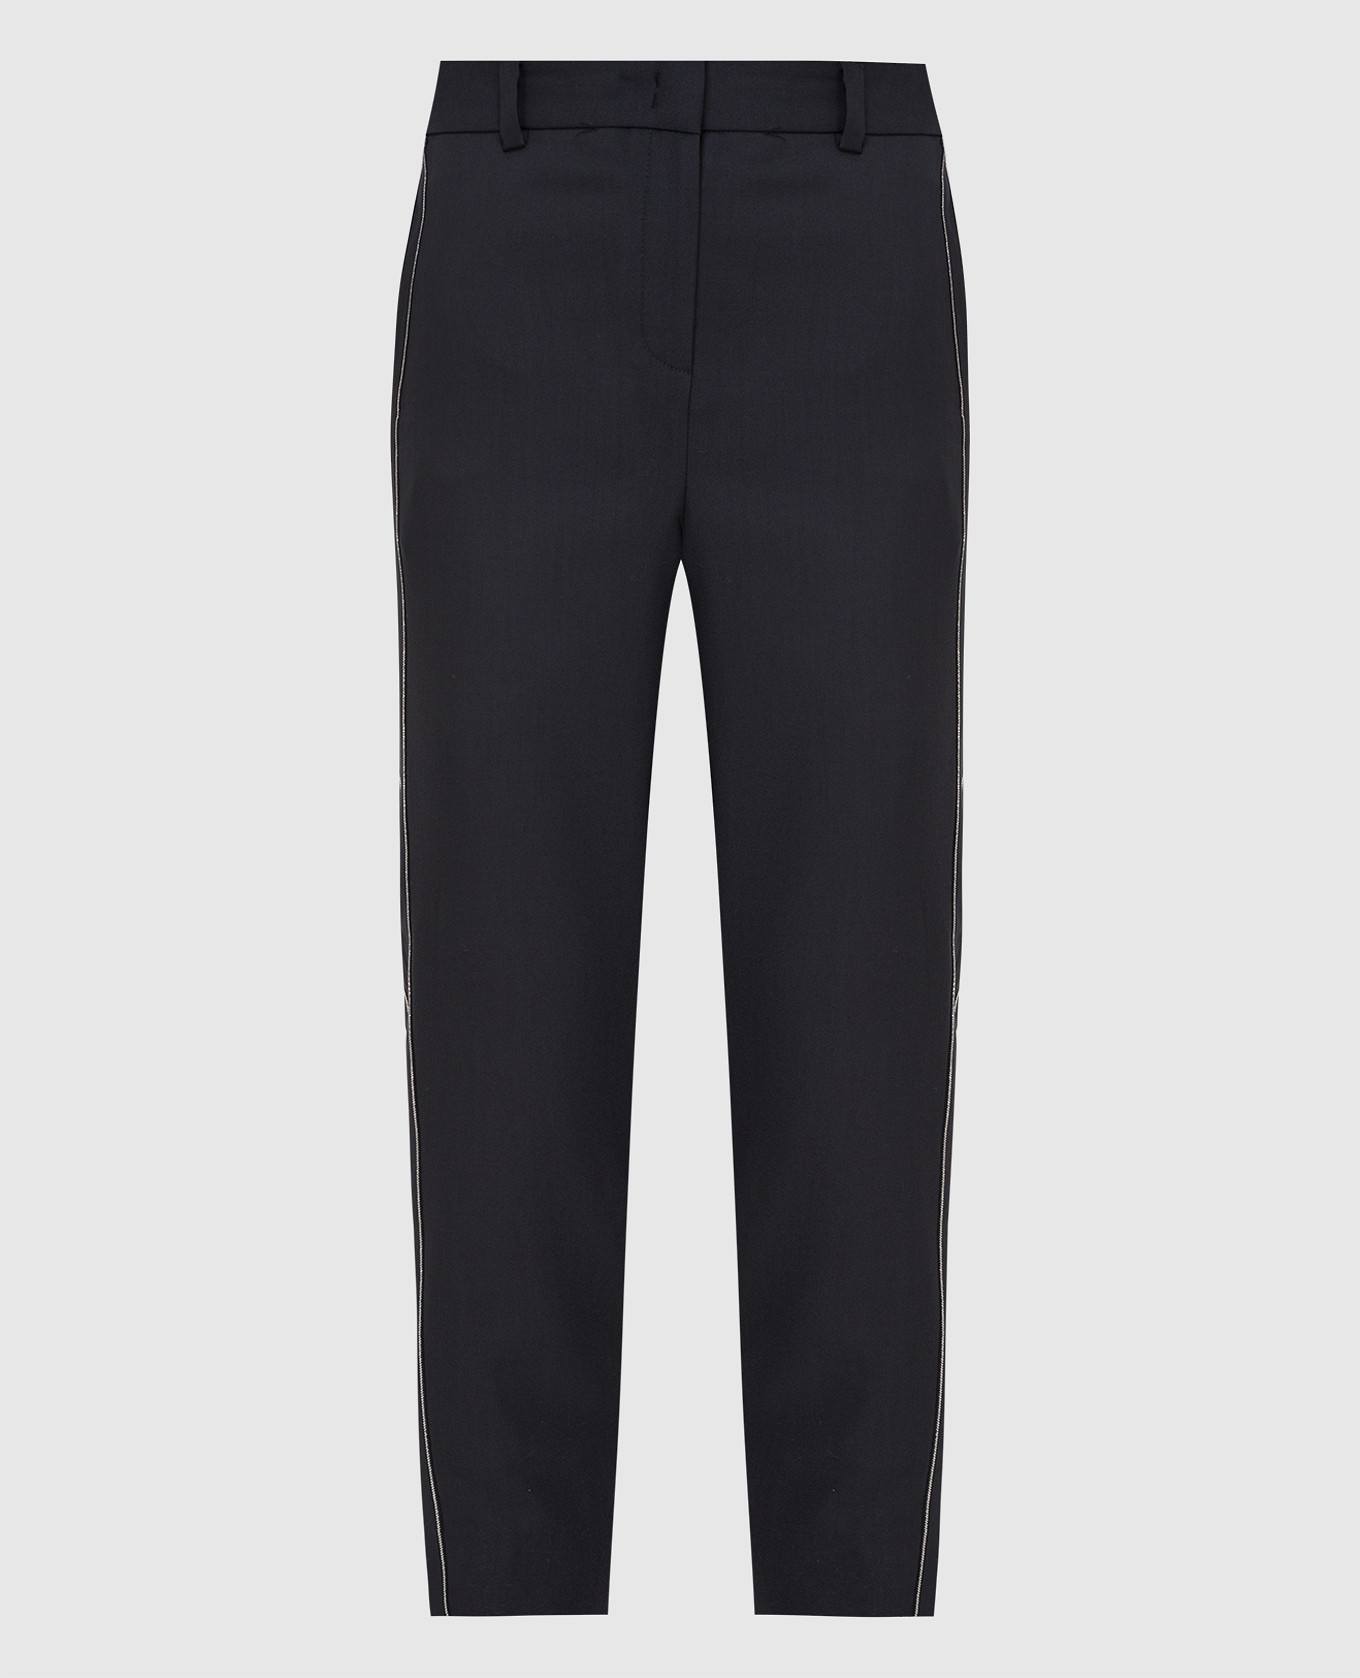 Navy blue wool trousers with chains